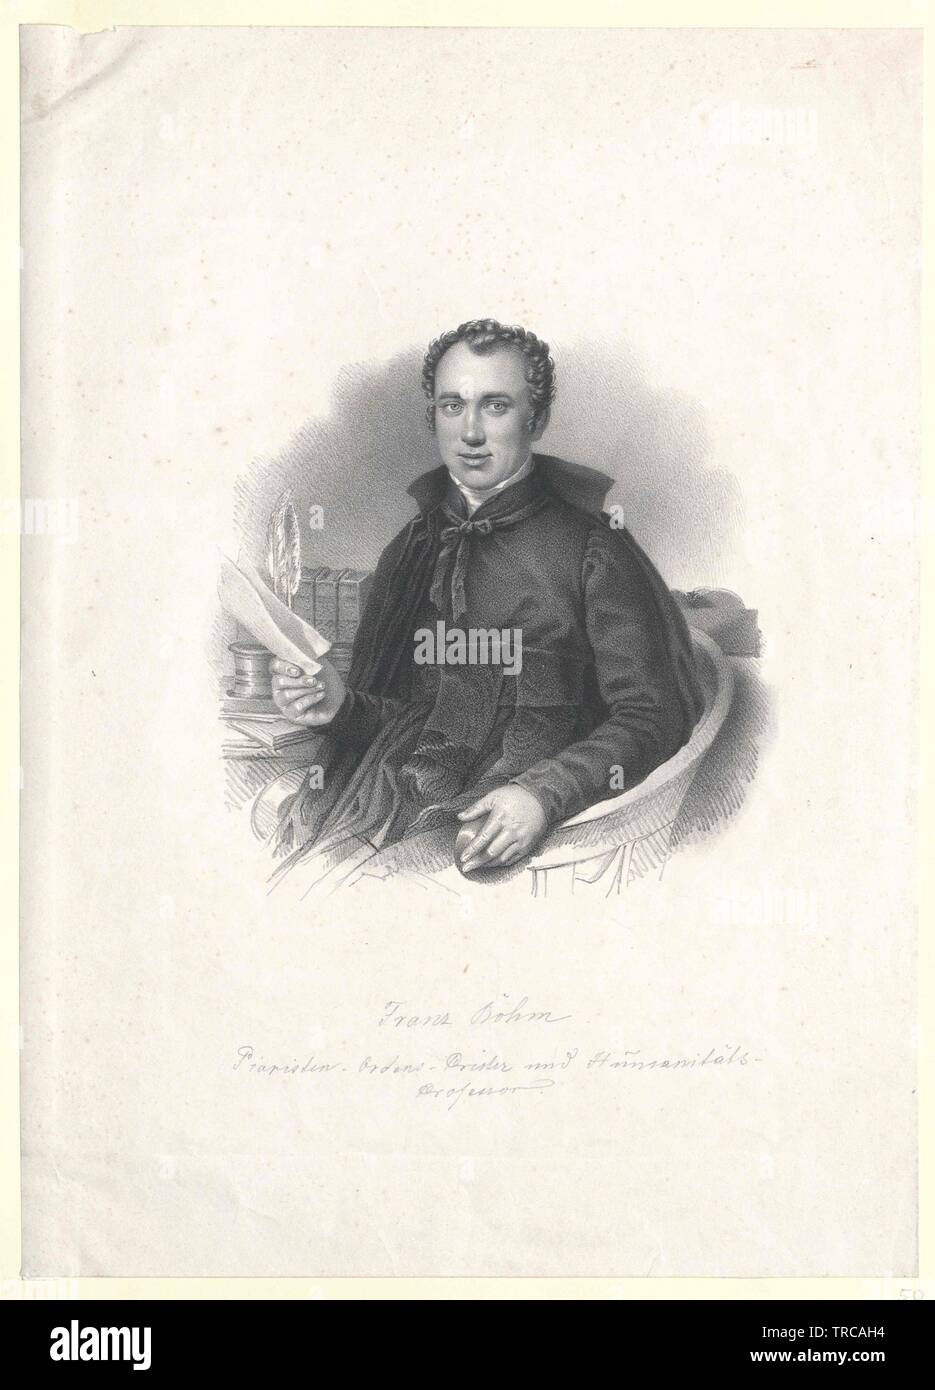 Boehm, Franz Xavier, Piarist, Profess 1828, parish priest 1830, at last (1855) allude as professor at the Imperial and Royal academy of military sciences in Viennese new town, Additional-Rights-Clearance-Info-Not-Available Stock Photo